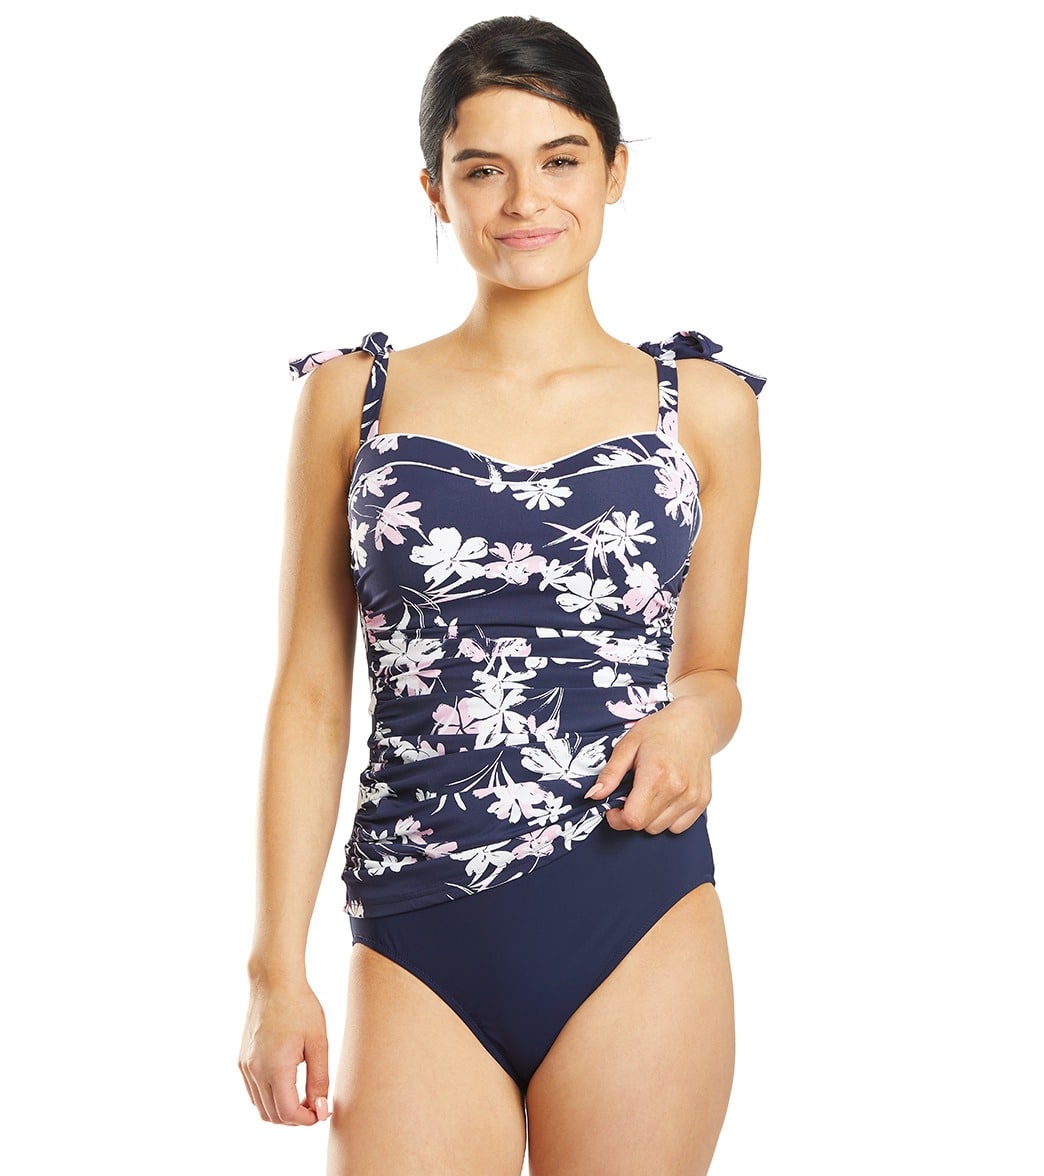 Profile By Gottex Sundance Tankini Top D Cup - Navy/Pink 32D - Swimoutlet.com